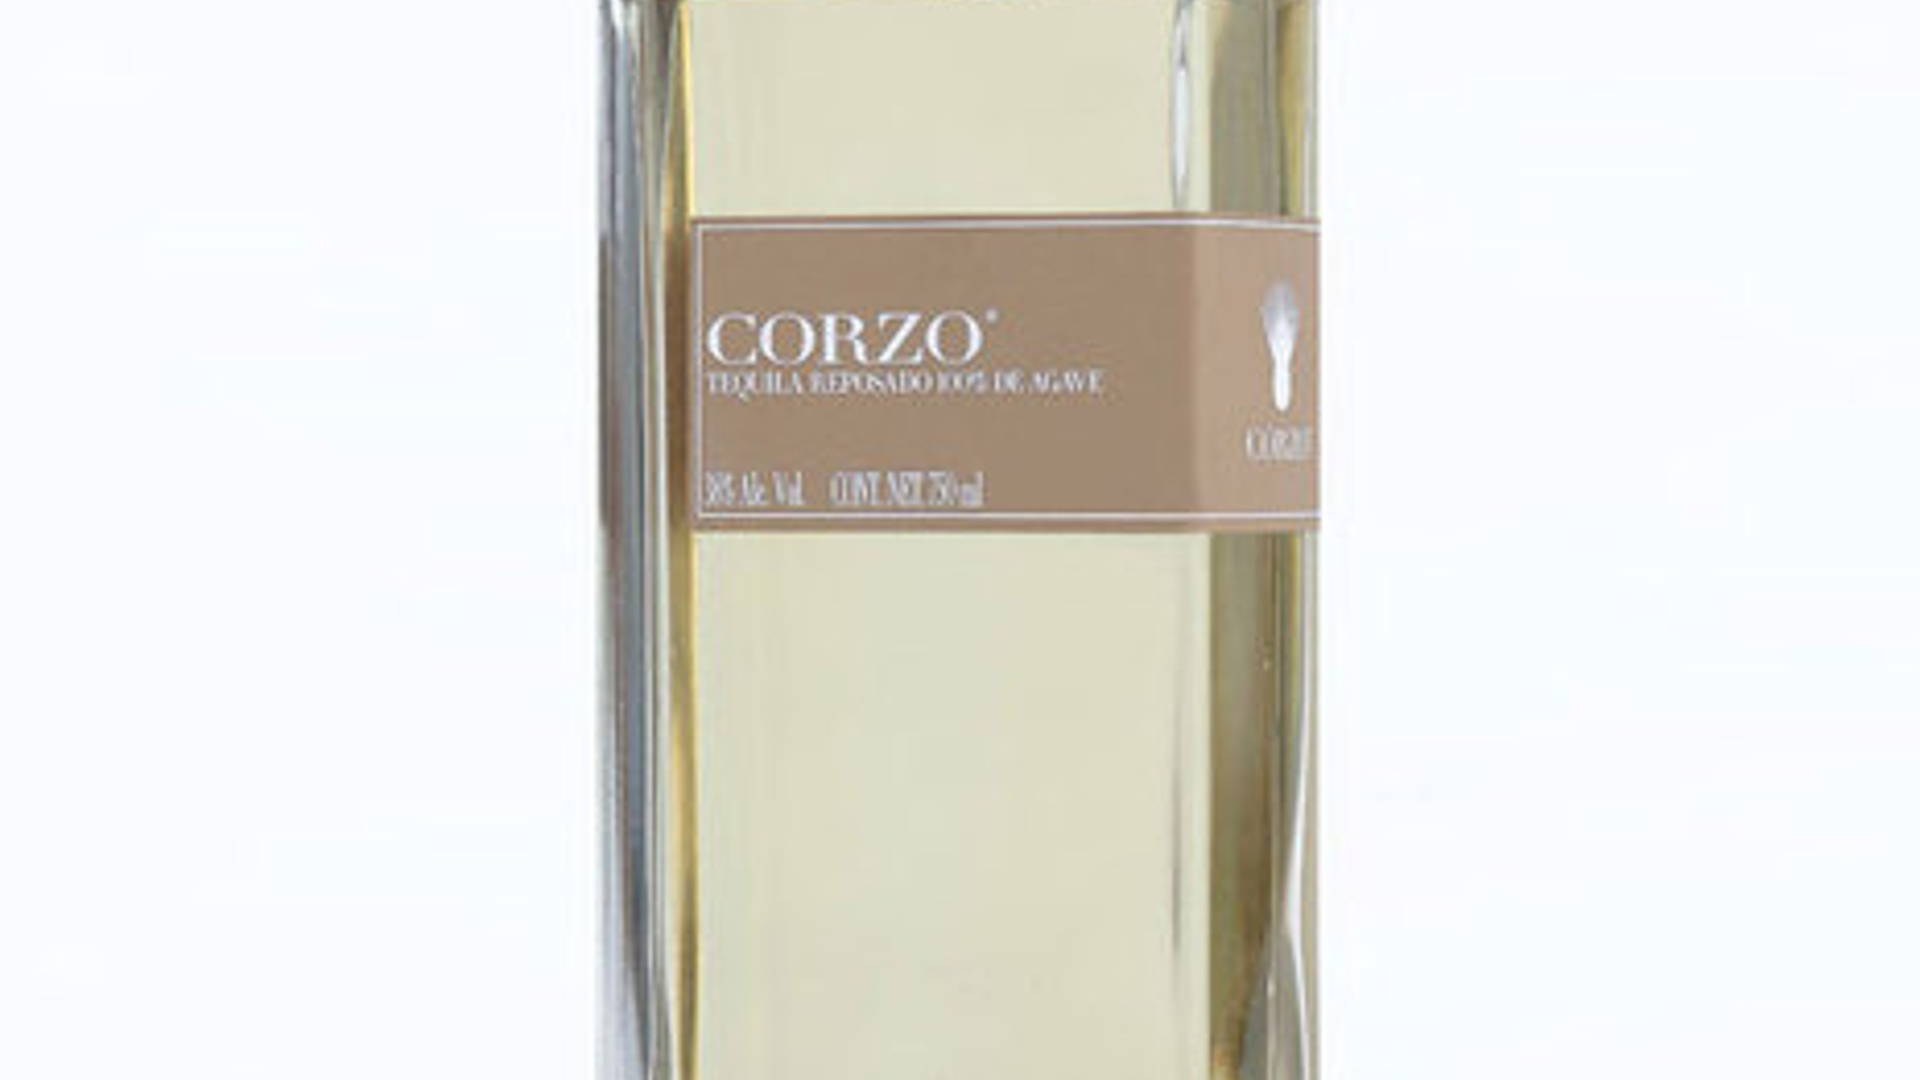 Featured image for Corzo Tequila